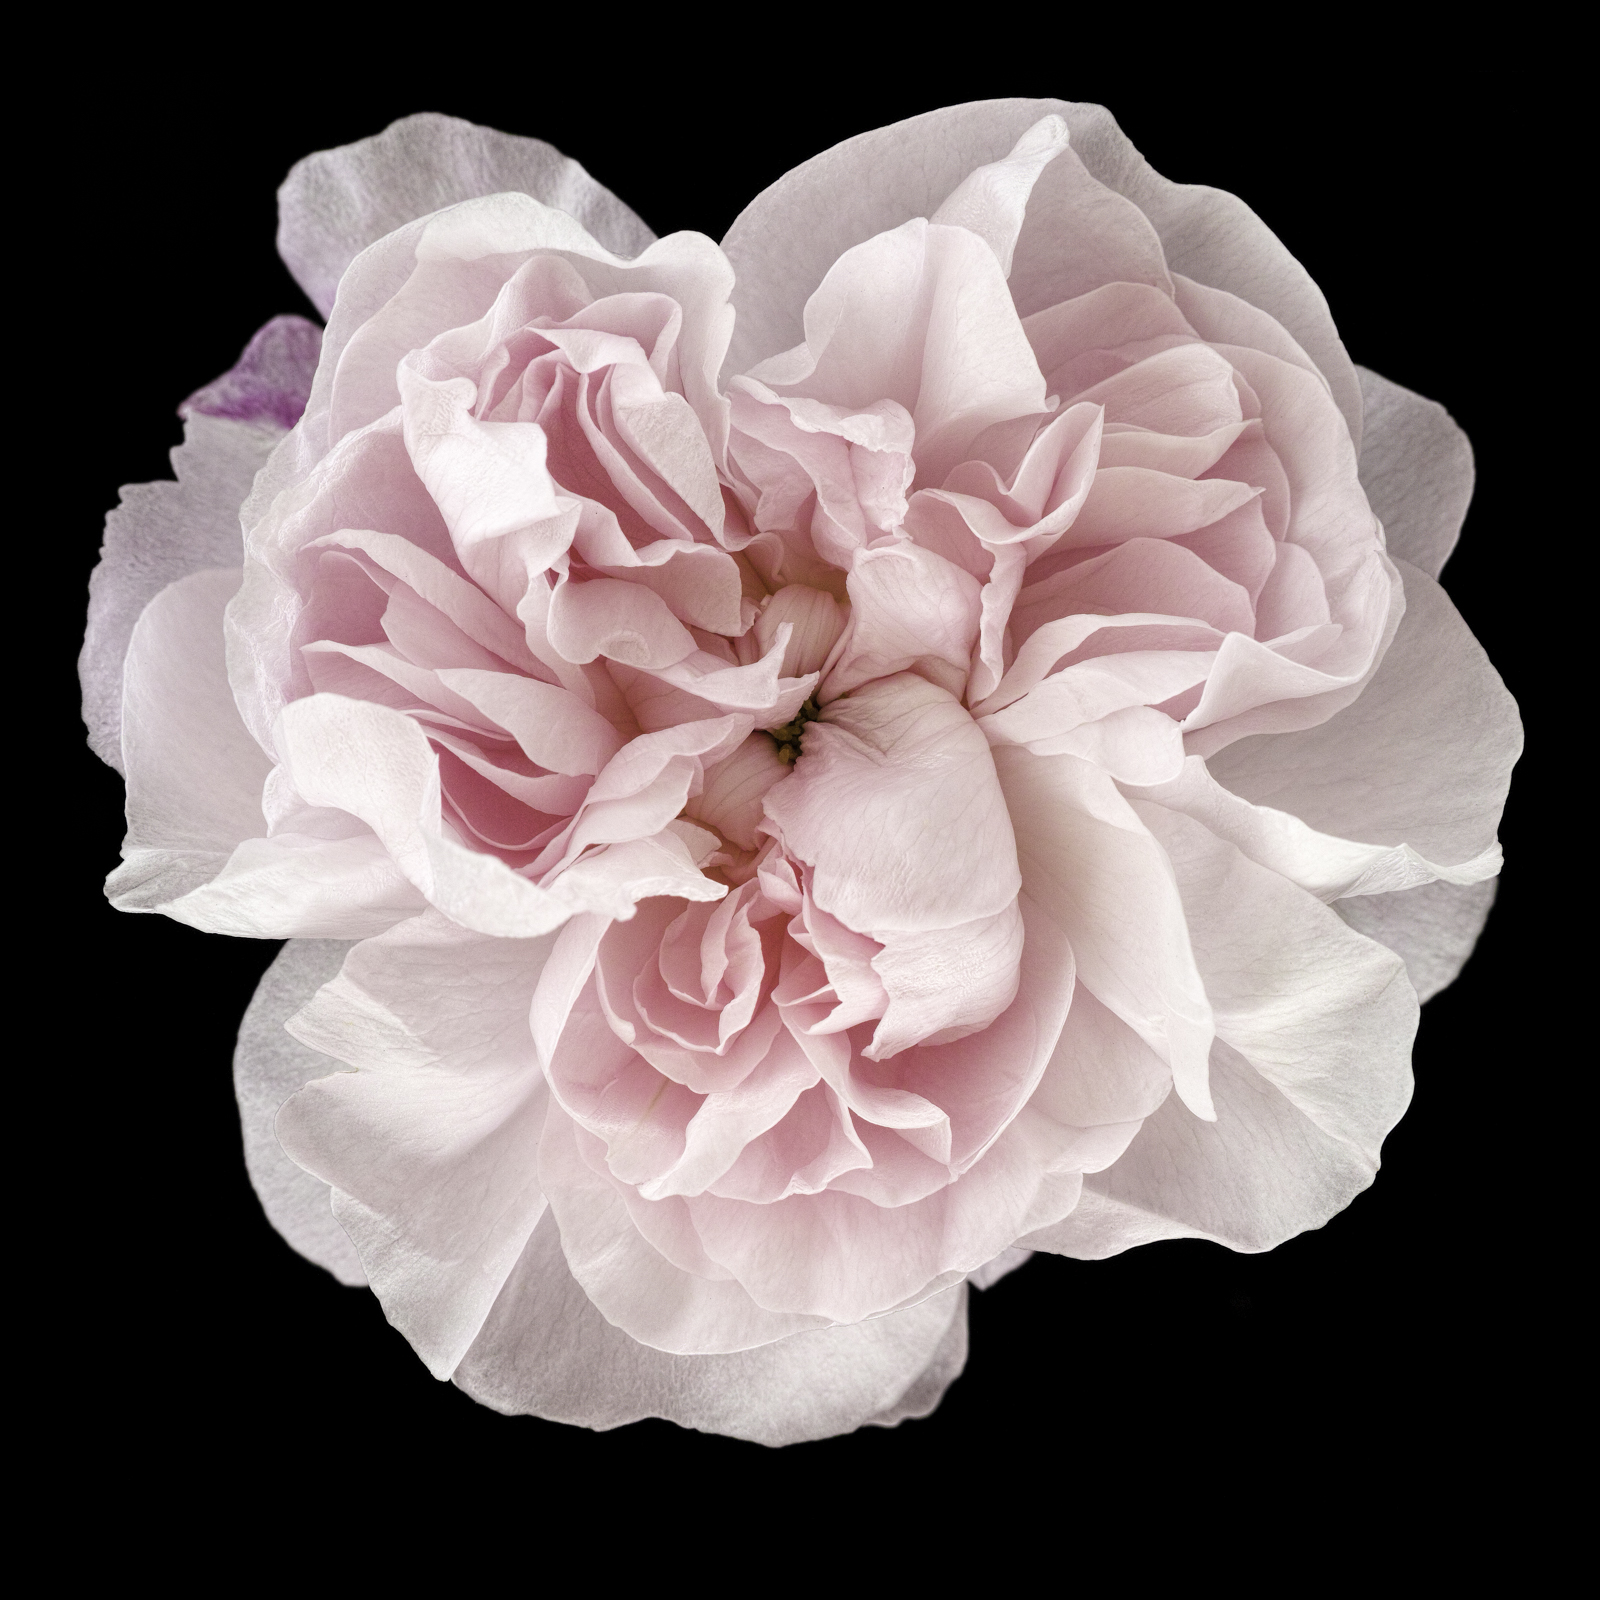 Photographs of old fashioned roses offering cross-pollinating ...